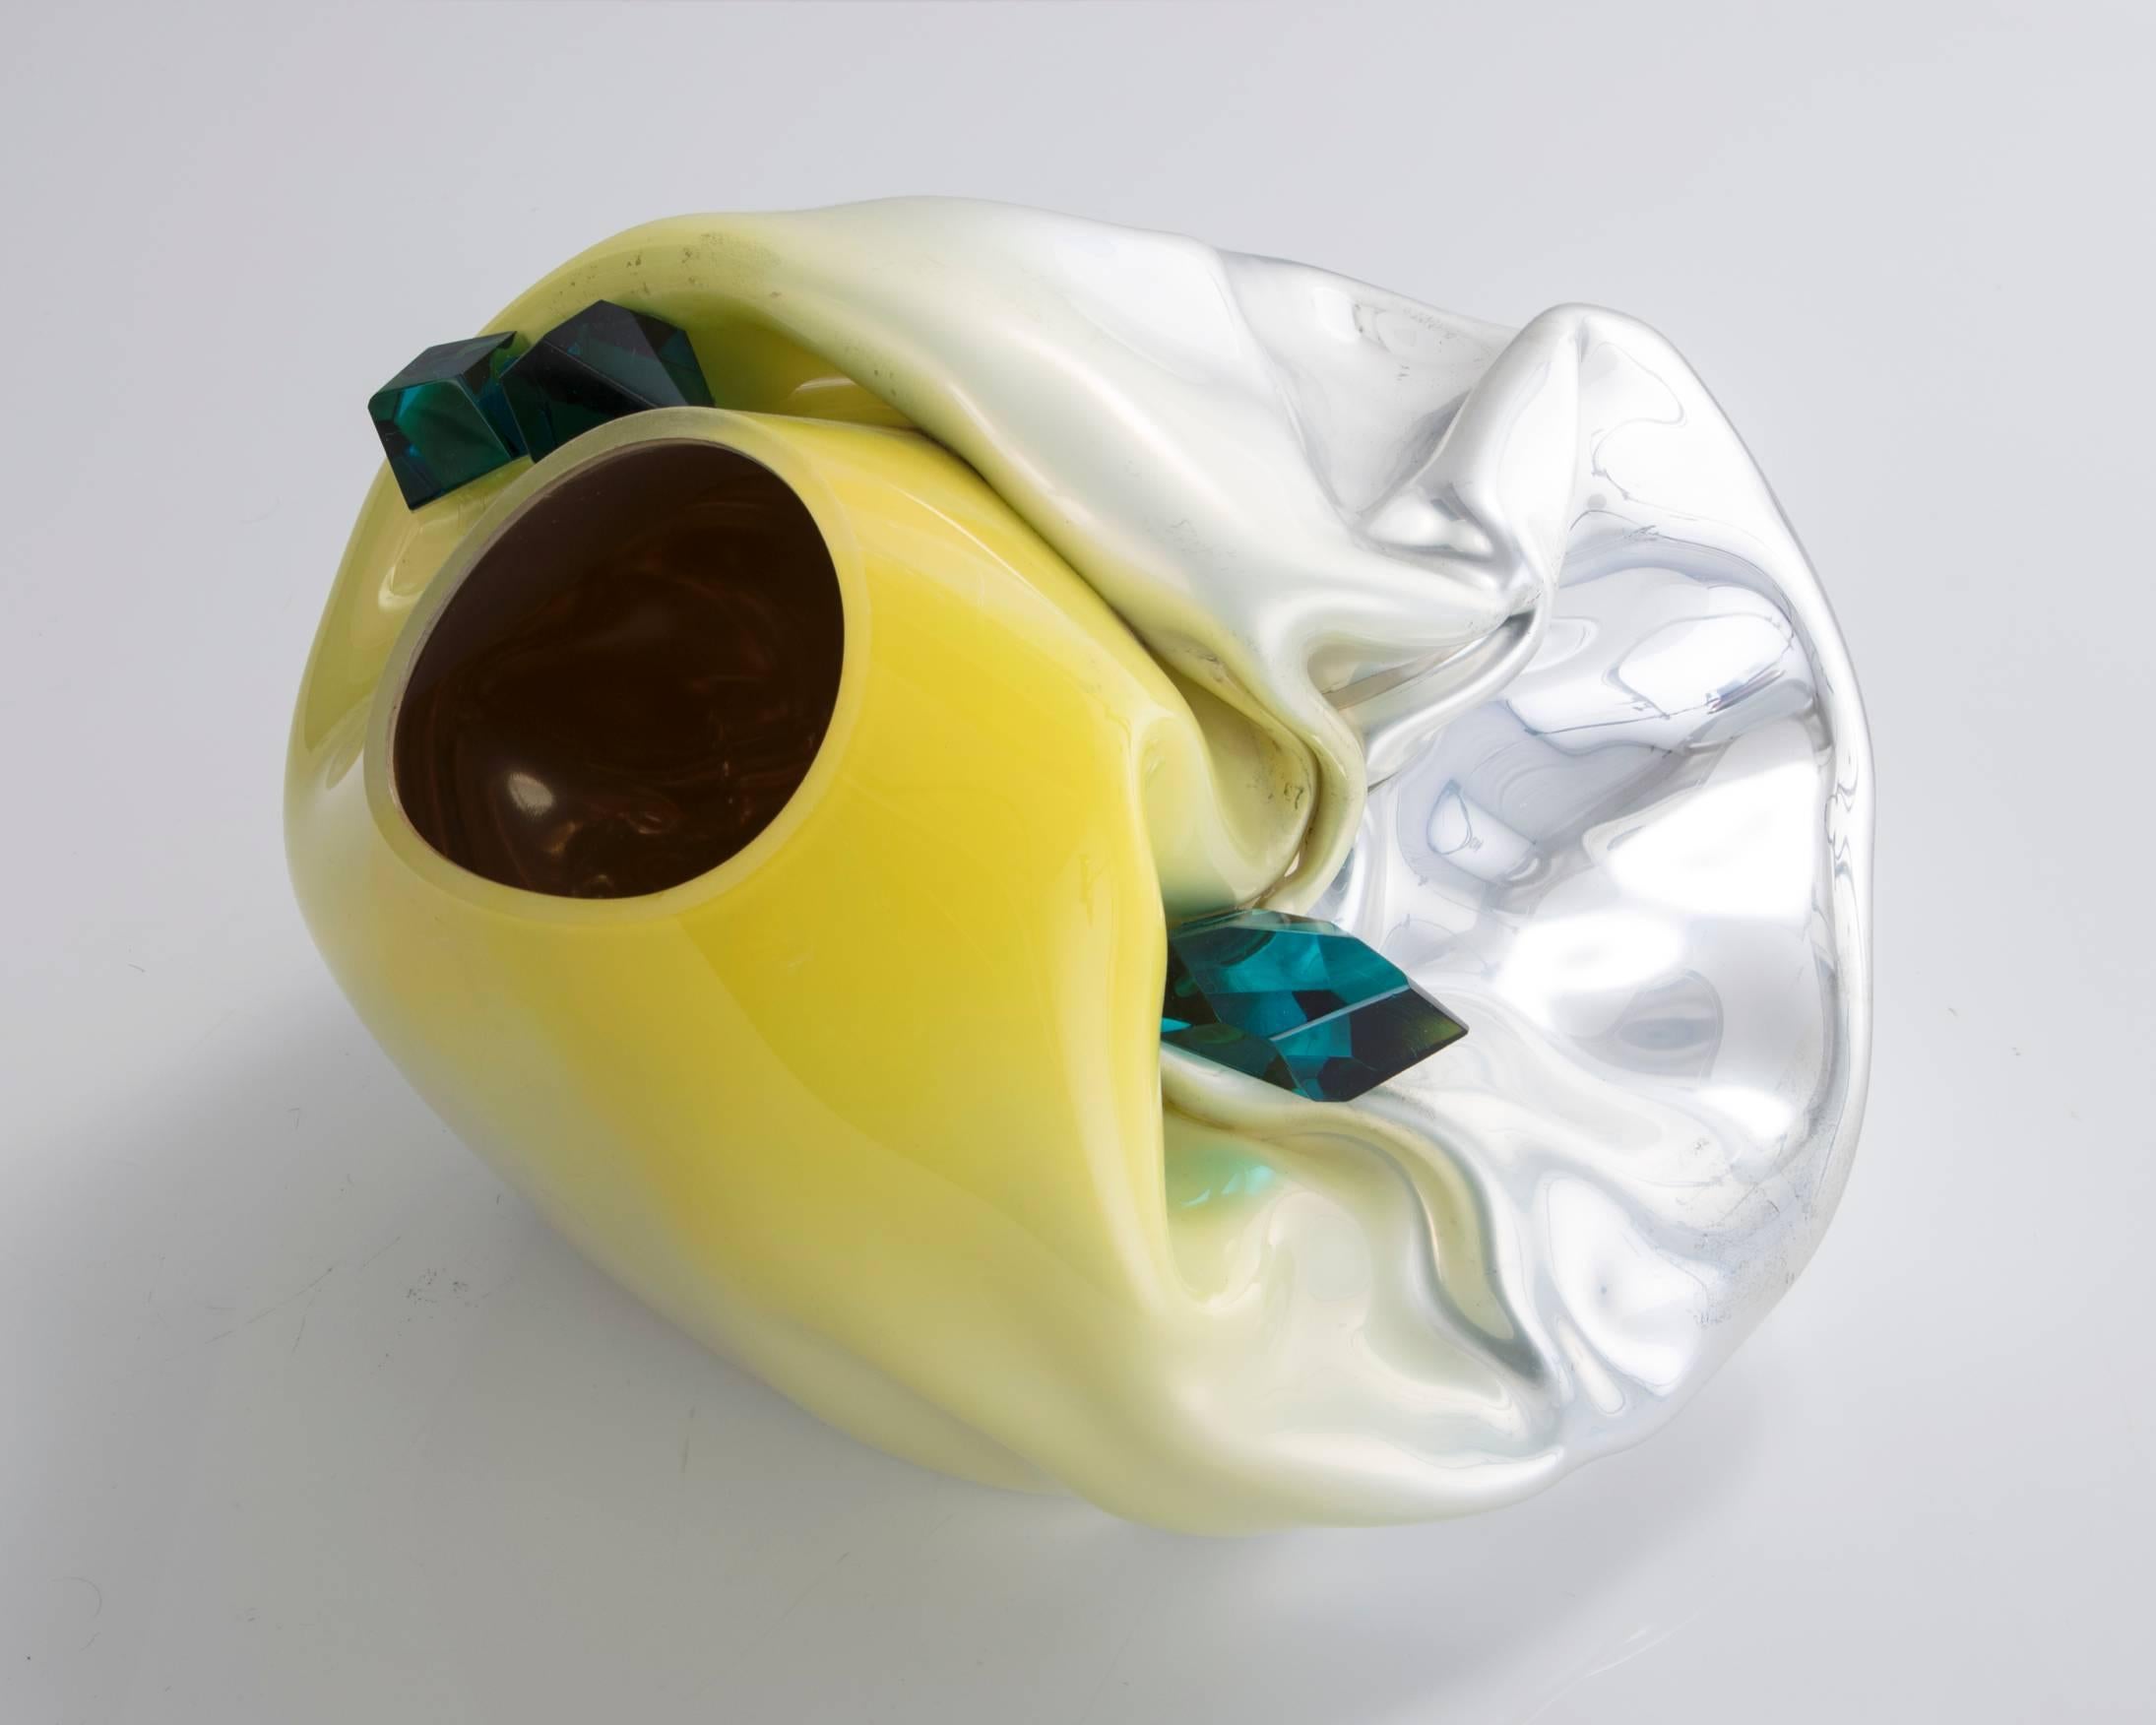 Unique crumpled sculptural vessel in silver mirrorized handblown glass with yellow-colored top and jade green glass crystals. Designed and made by Jeff Zimmerman, USA, 2016.